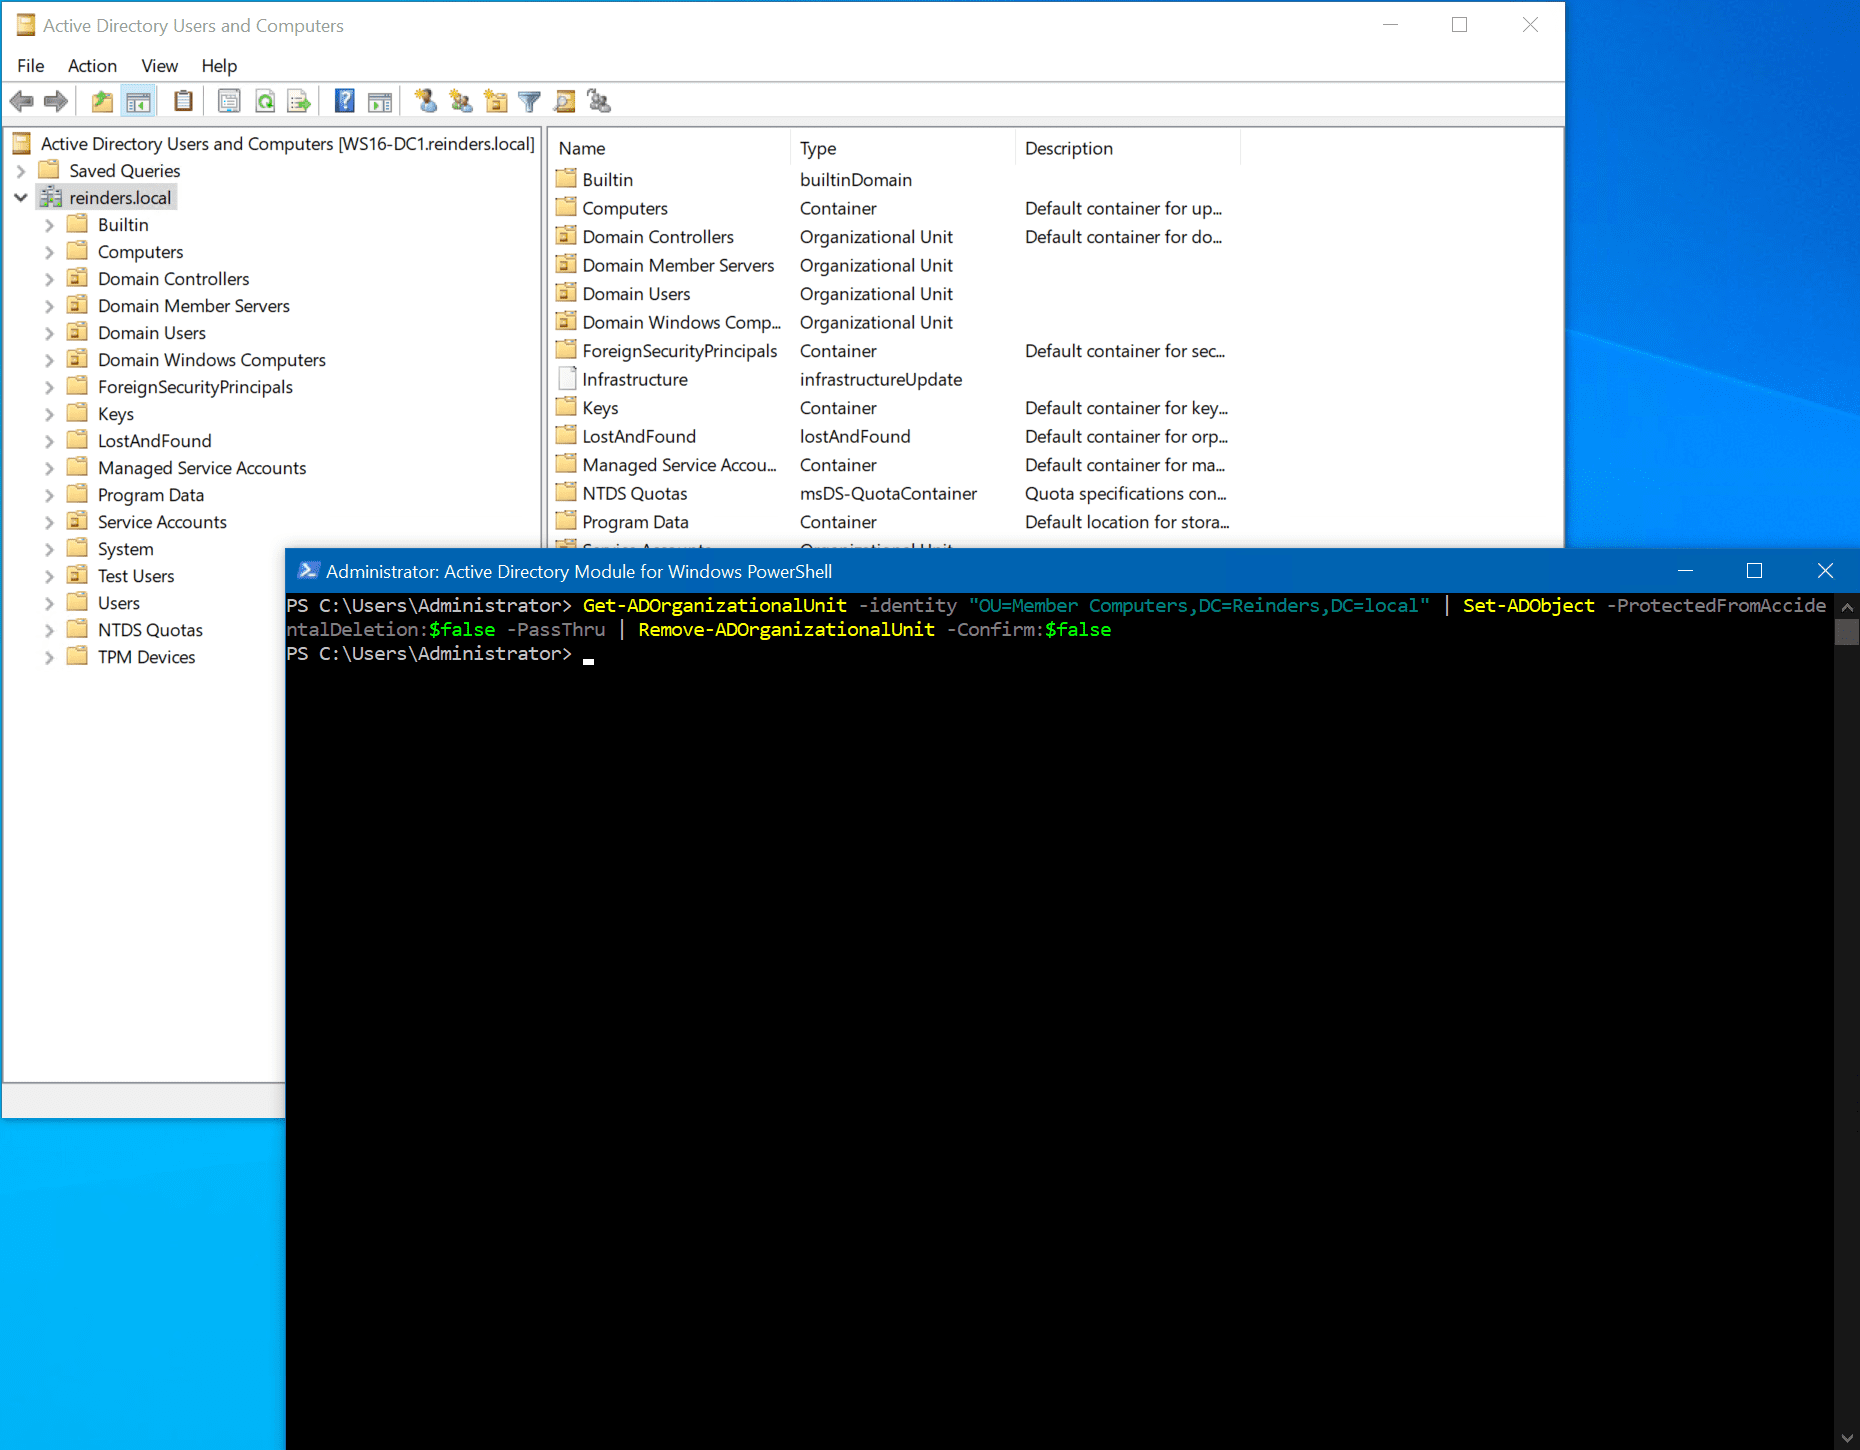 We've now deleted the 'Member Computers' OU with our PowerShell commands